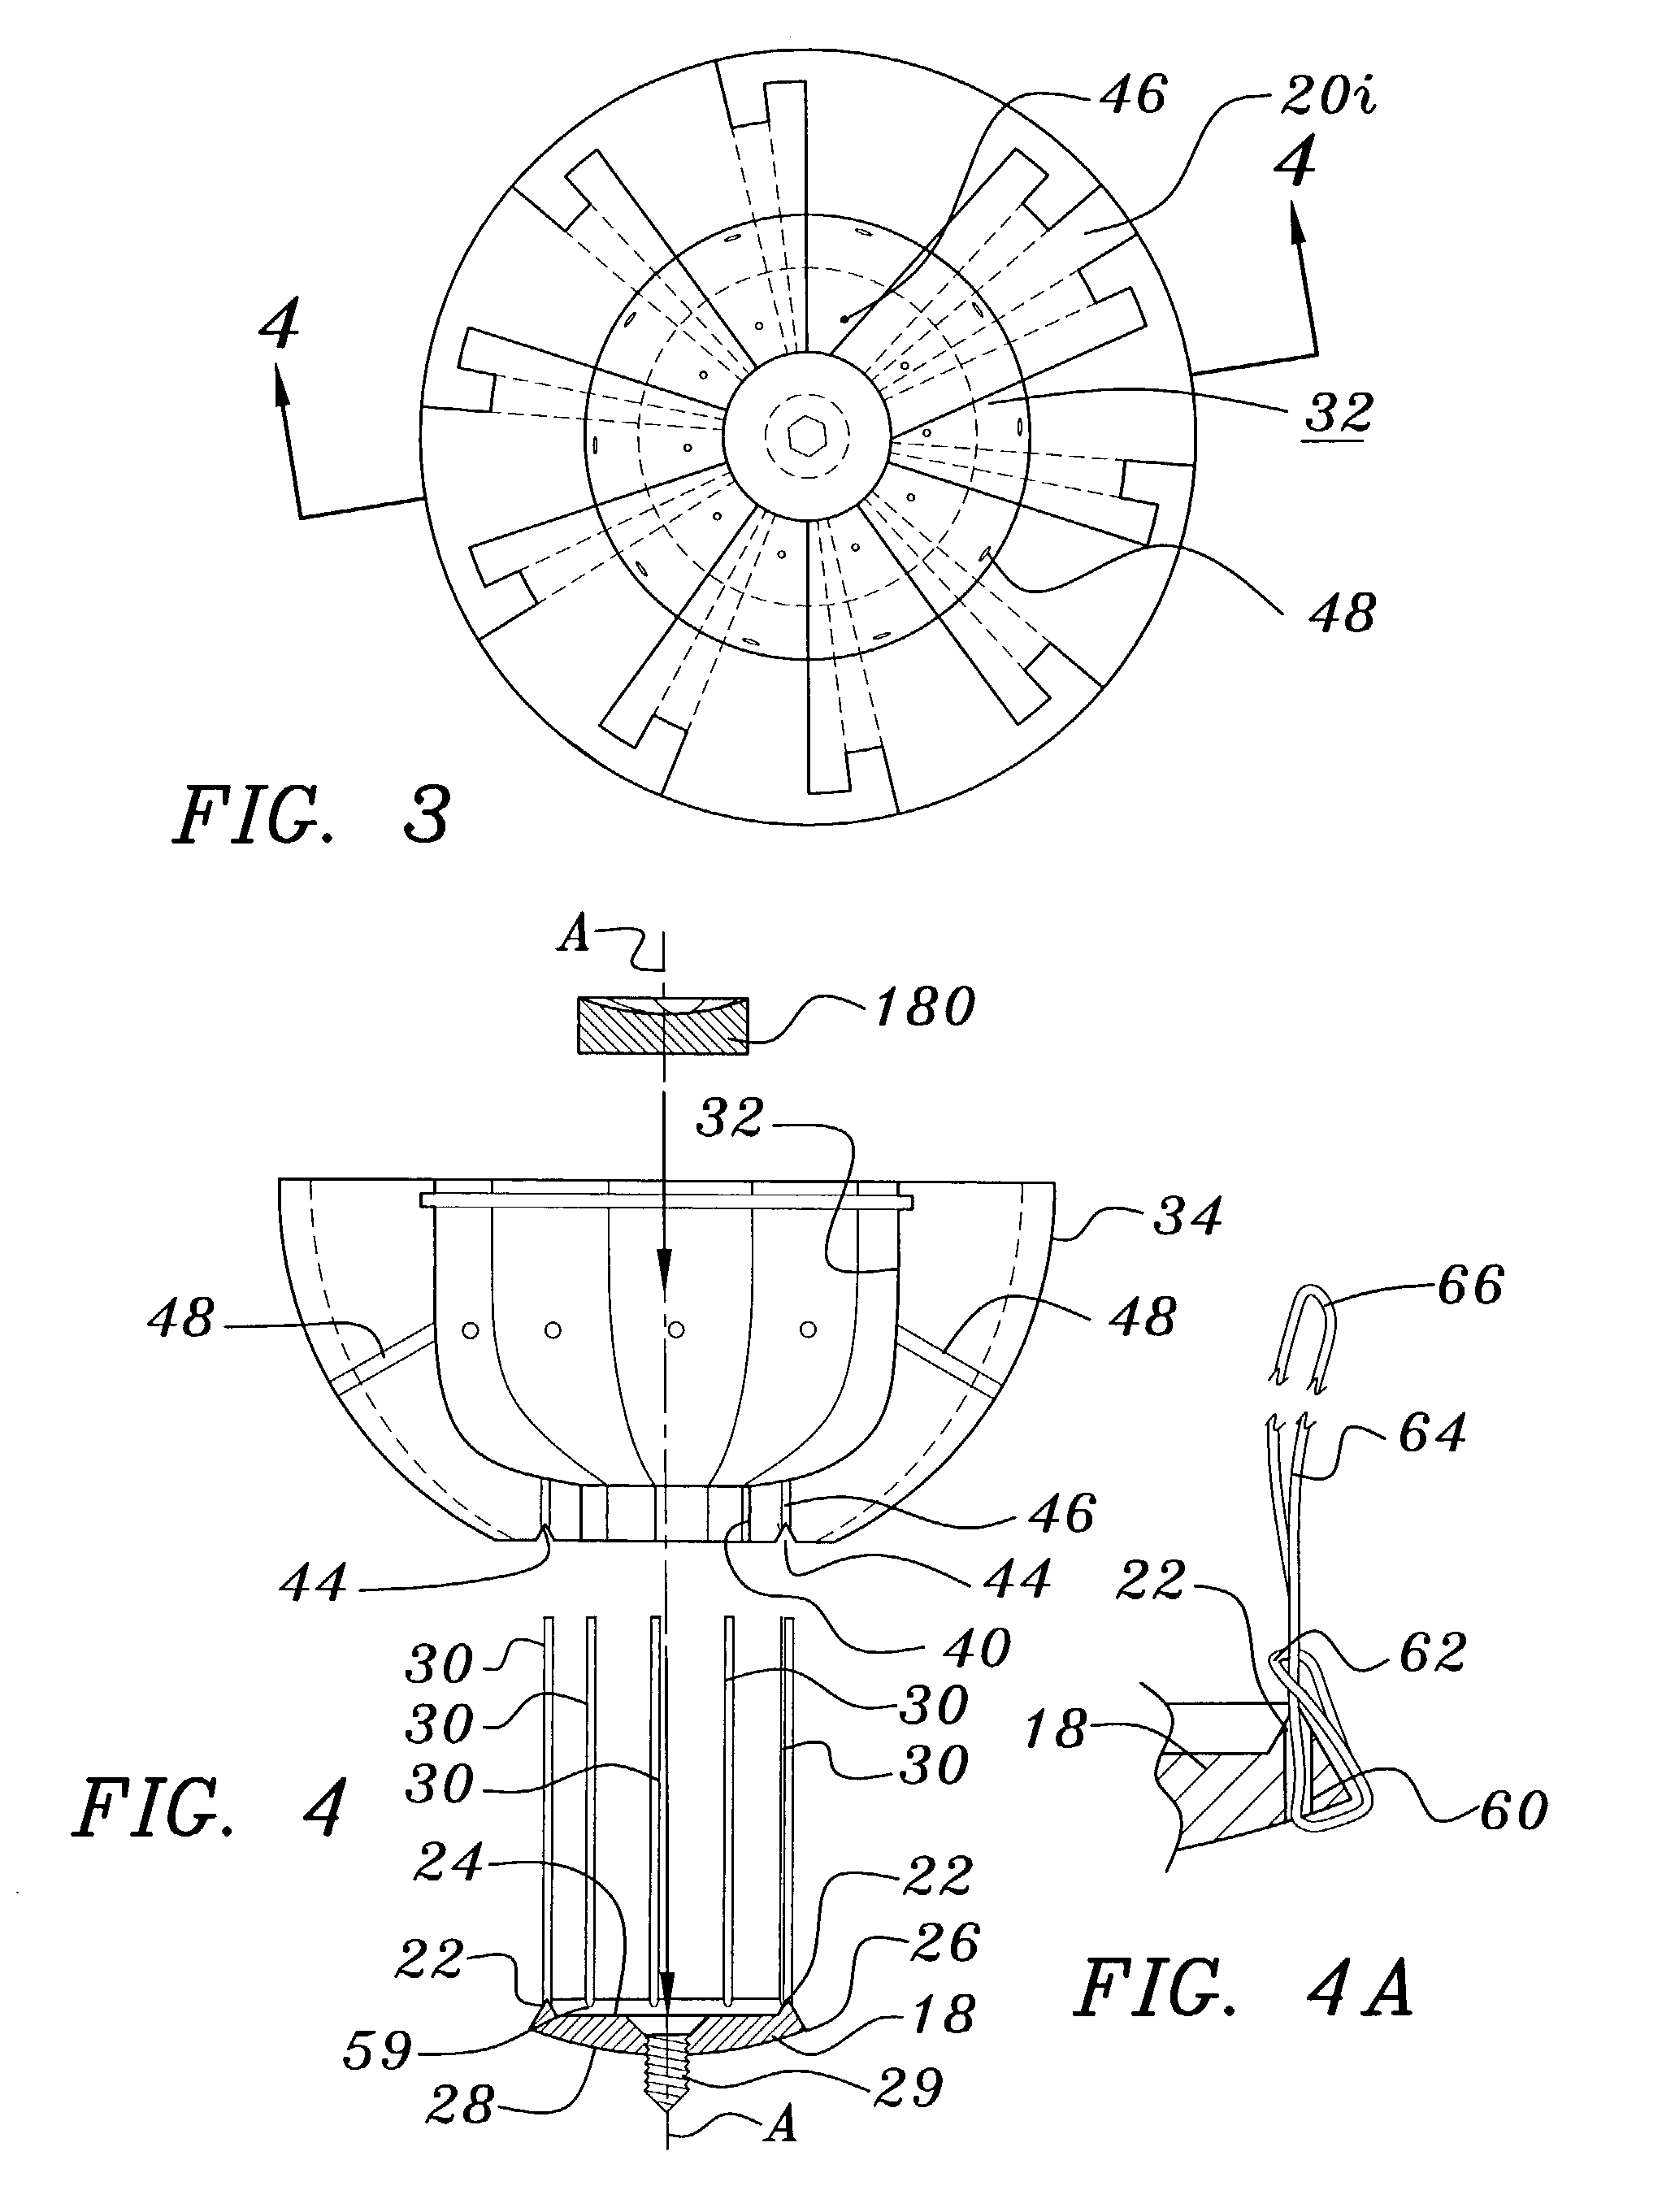 Joint prosthesis and method for implantation